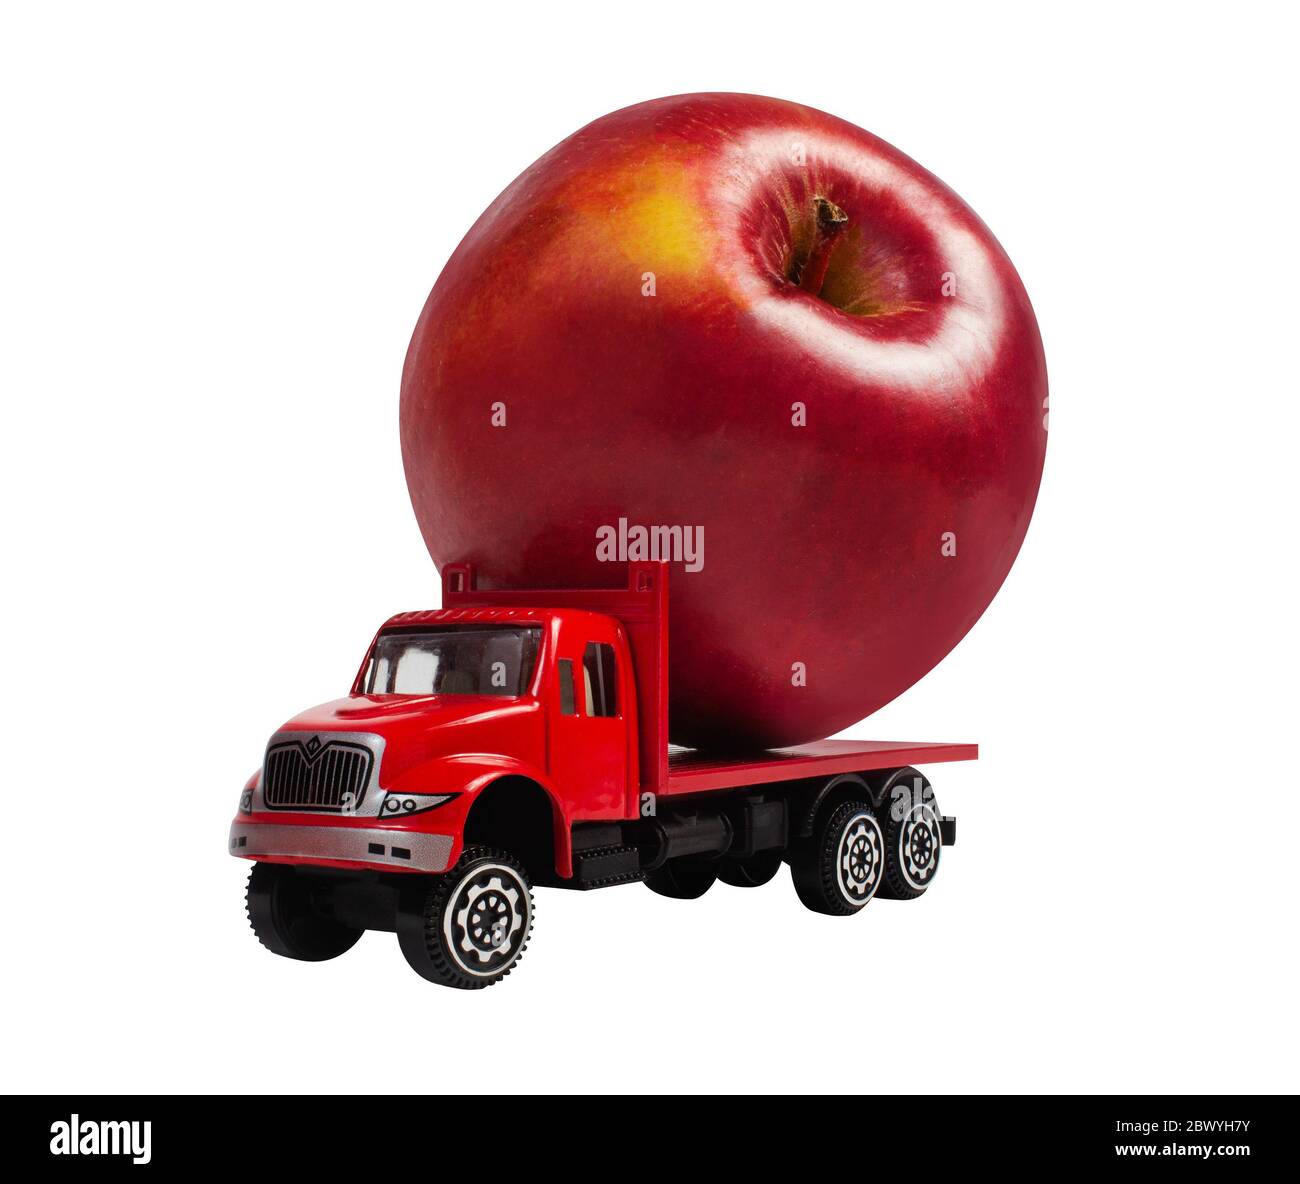 Isolated photo of a toy truck with apple cargo on white background angle view. Stock Photo